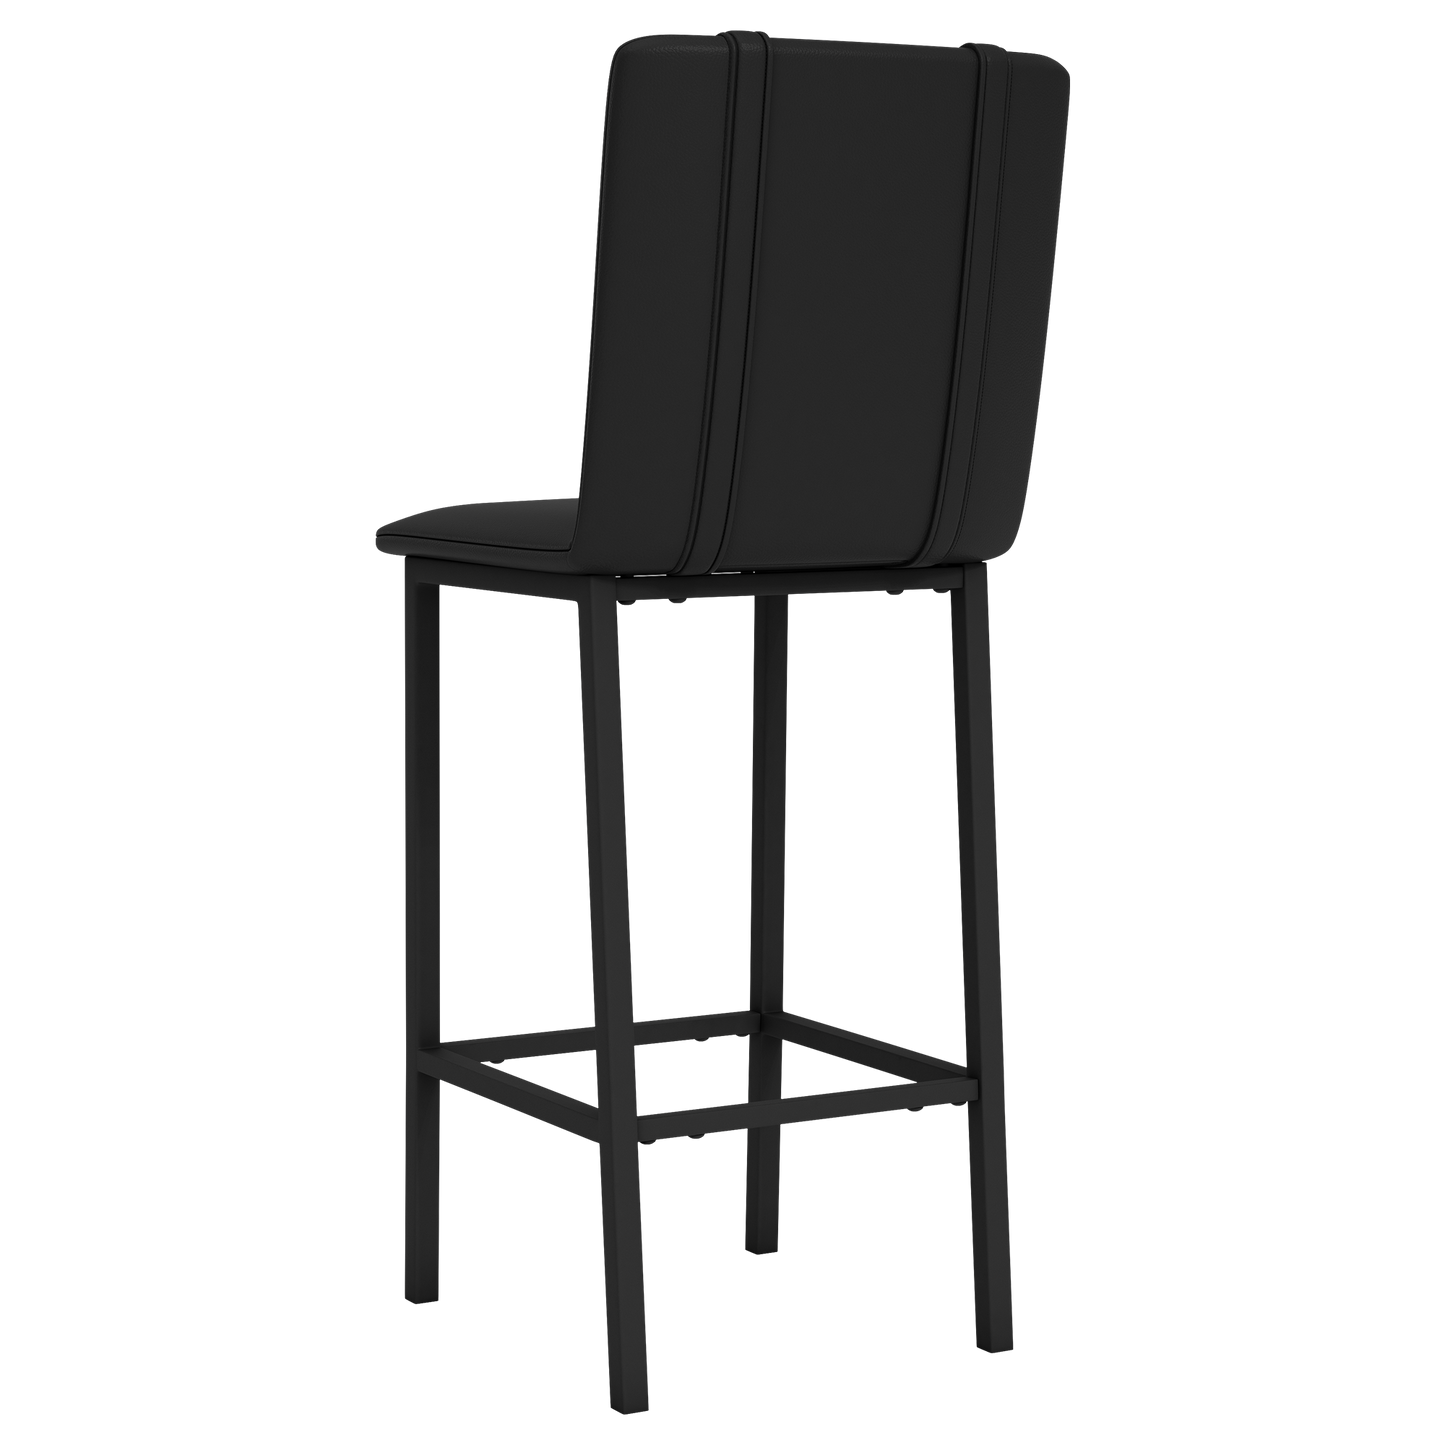 Bar Stool 500 with UNC Wilmington Secondary Logo Set of 2